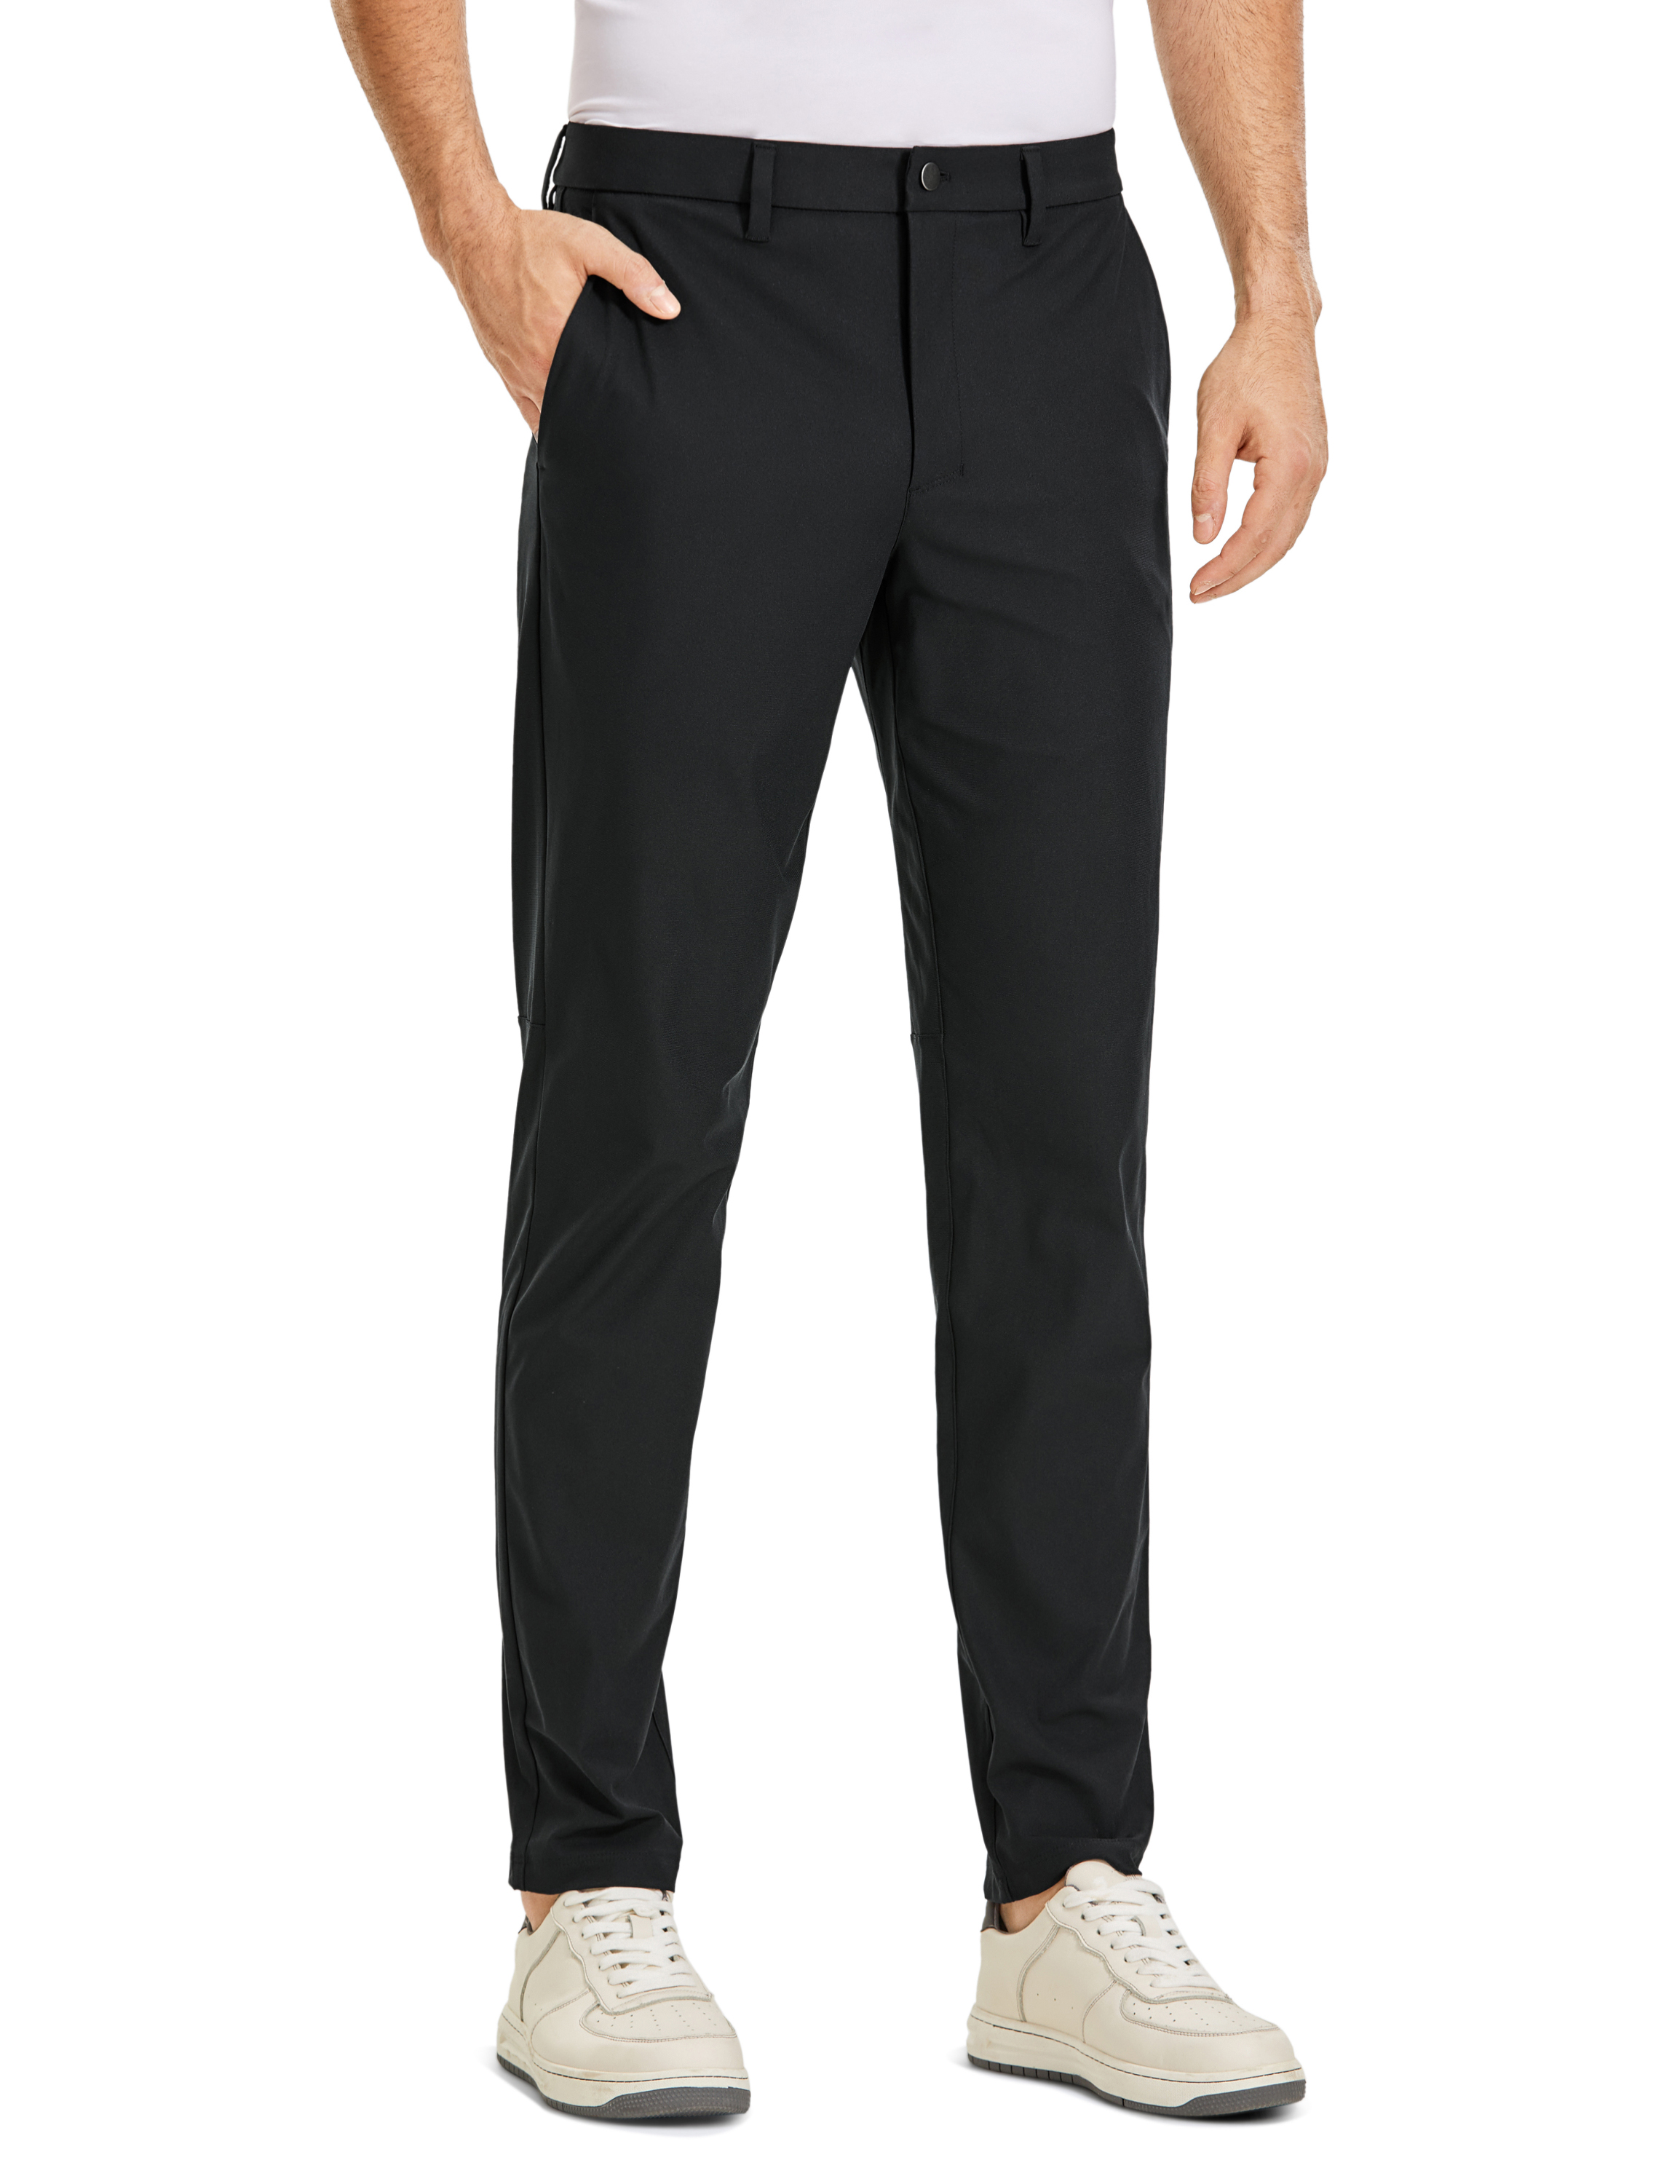 CRZ YOGA All-Day Comfy Classic-Fit Men's 32 Inches Golf Pants Work